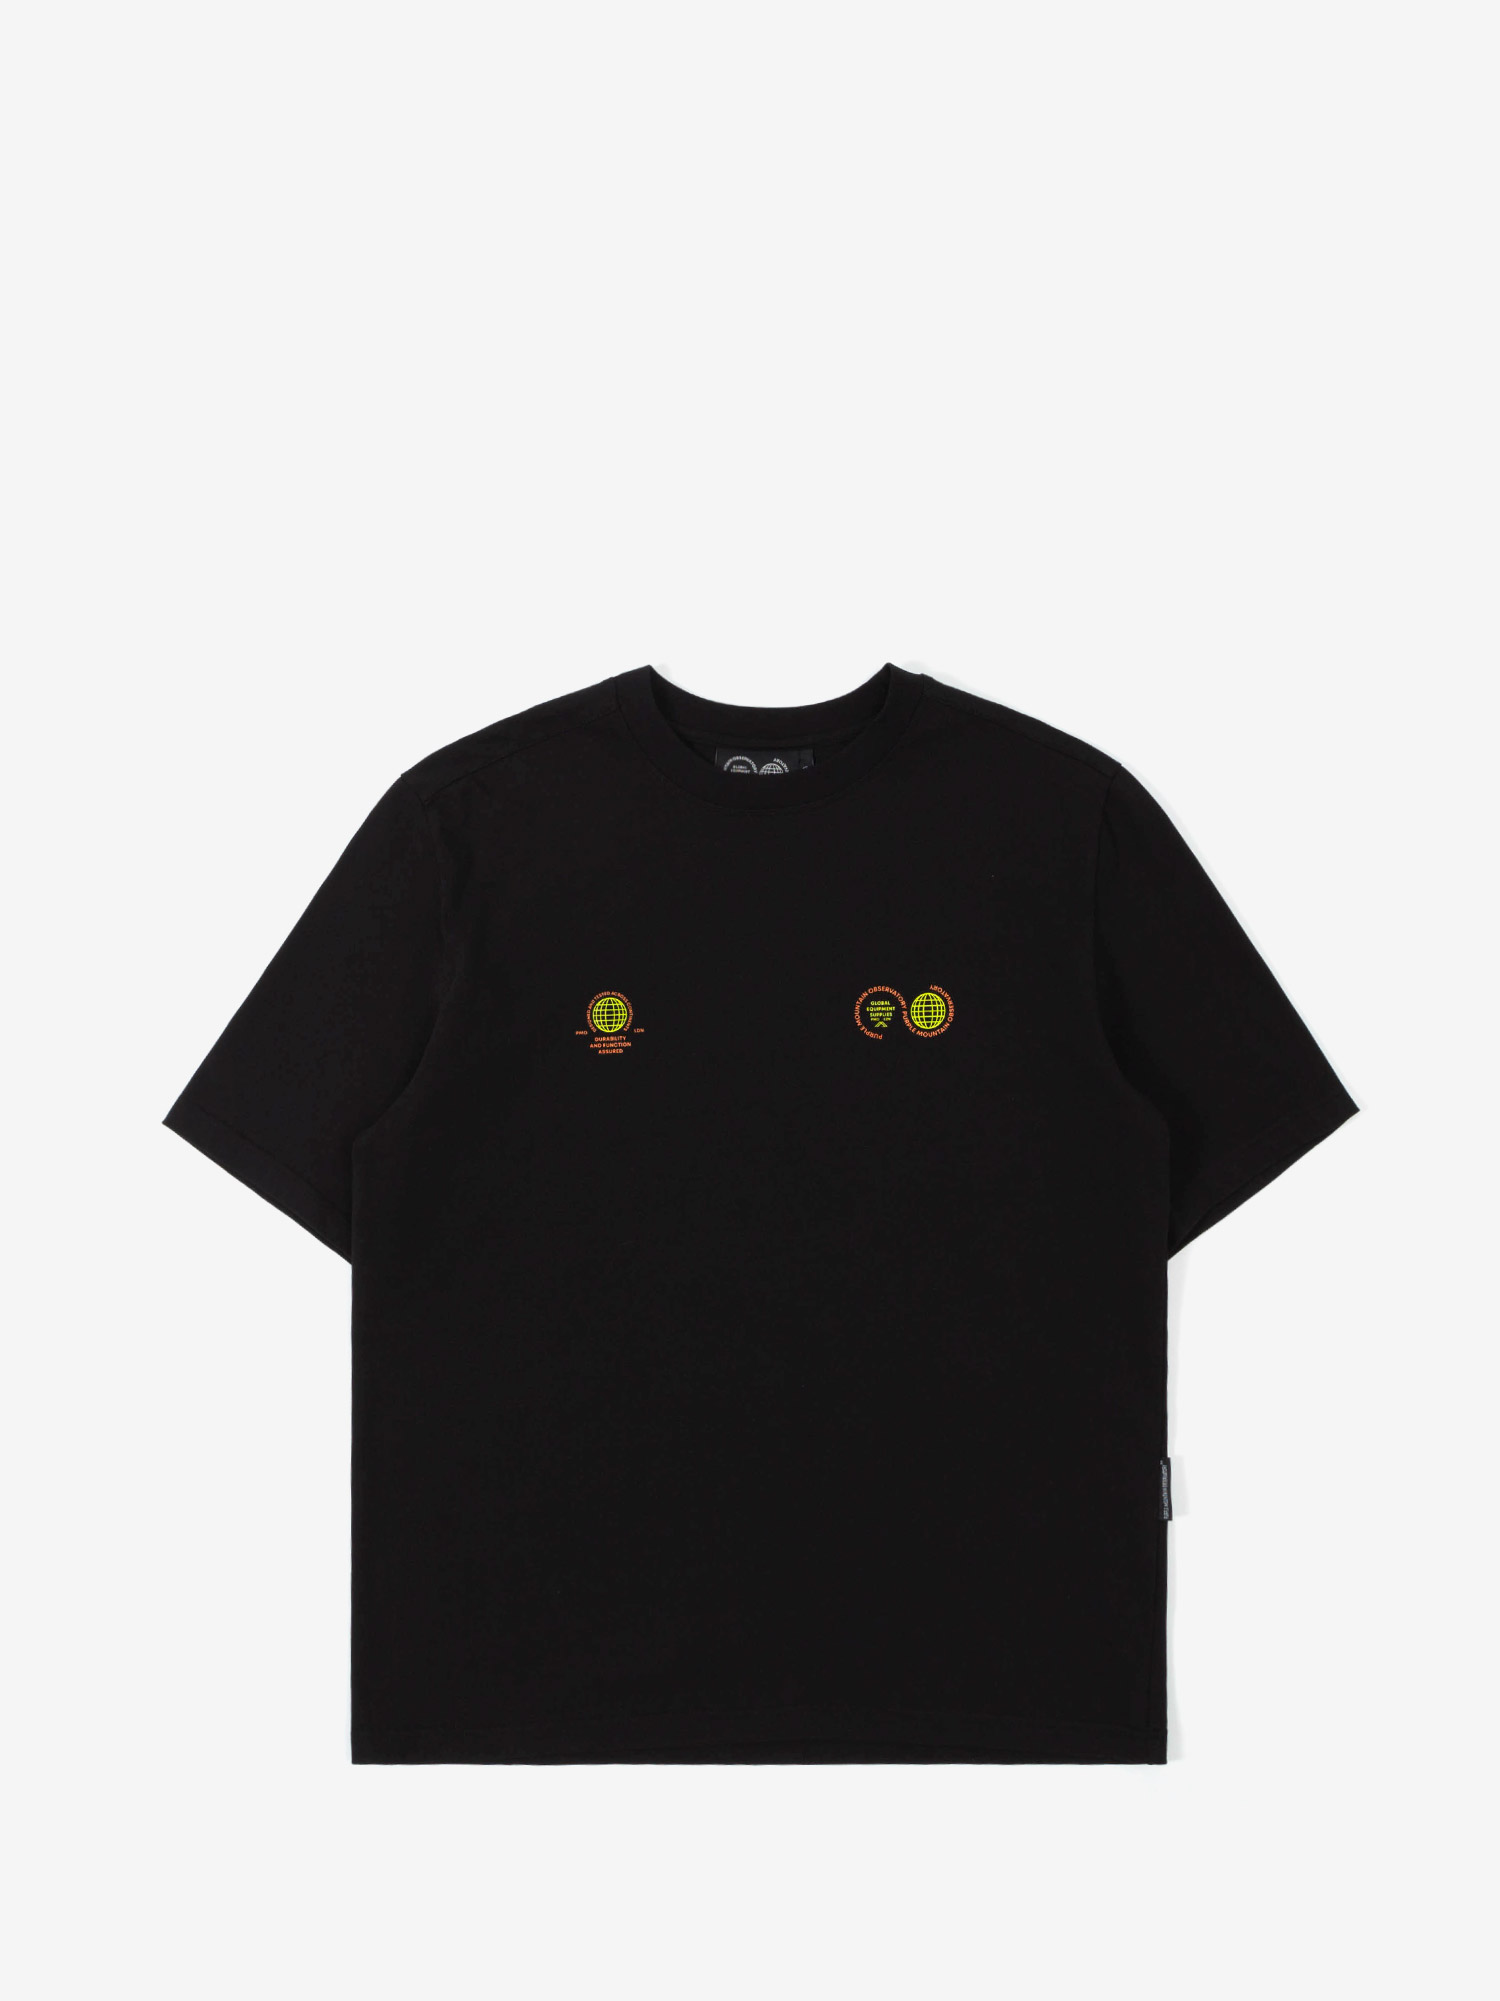 Featured image for “GLOBE SHORT SLEEVE T-SHIRT BLACK”